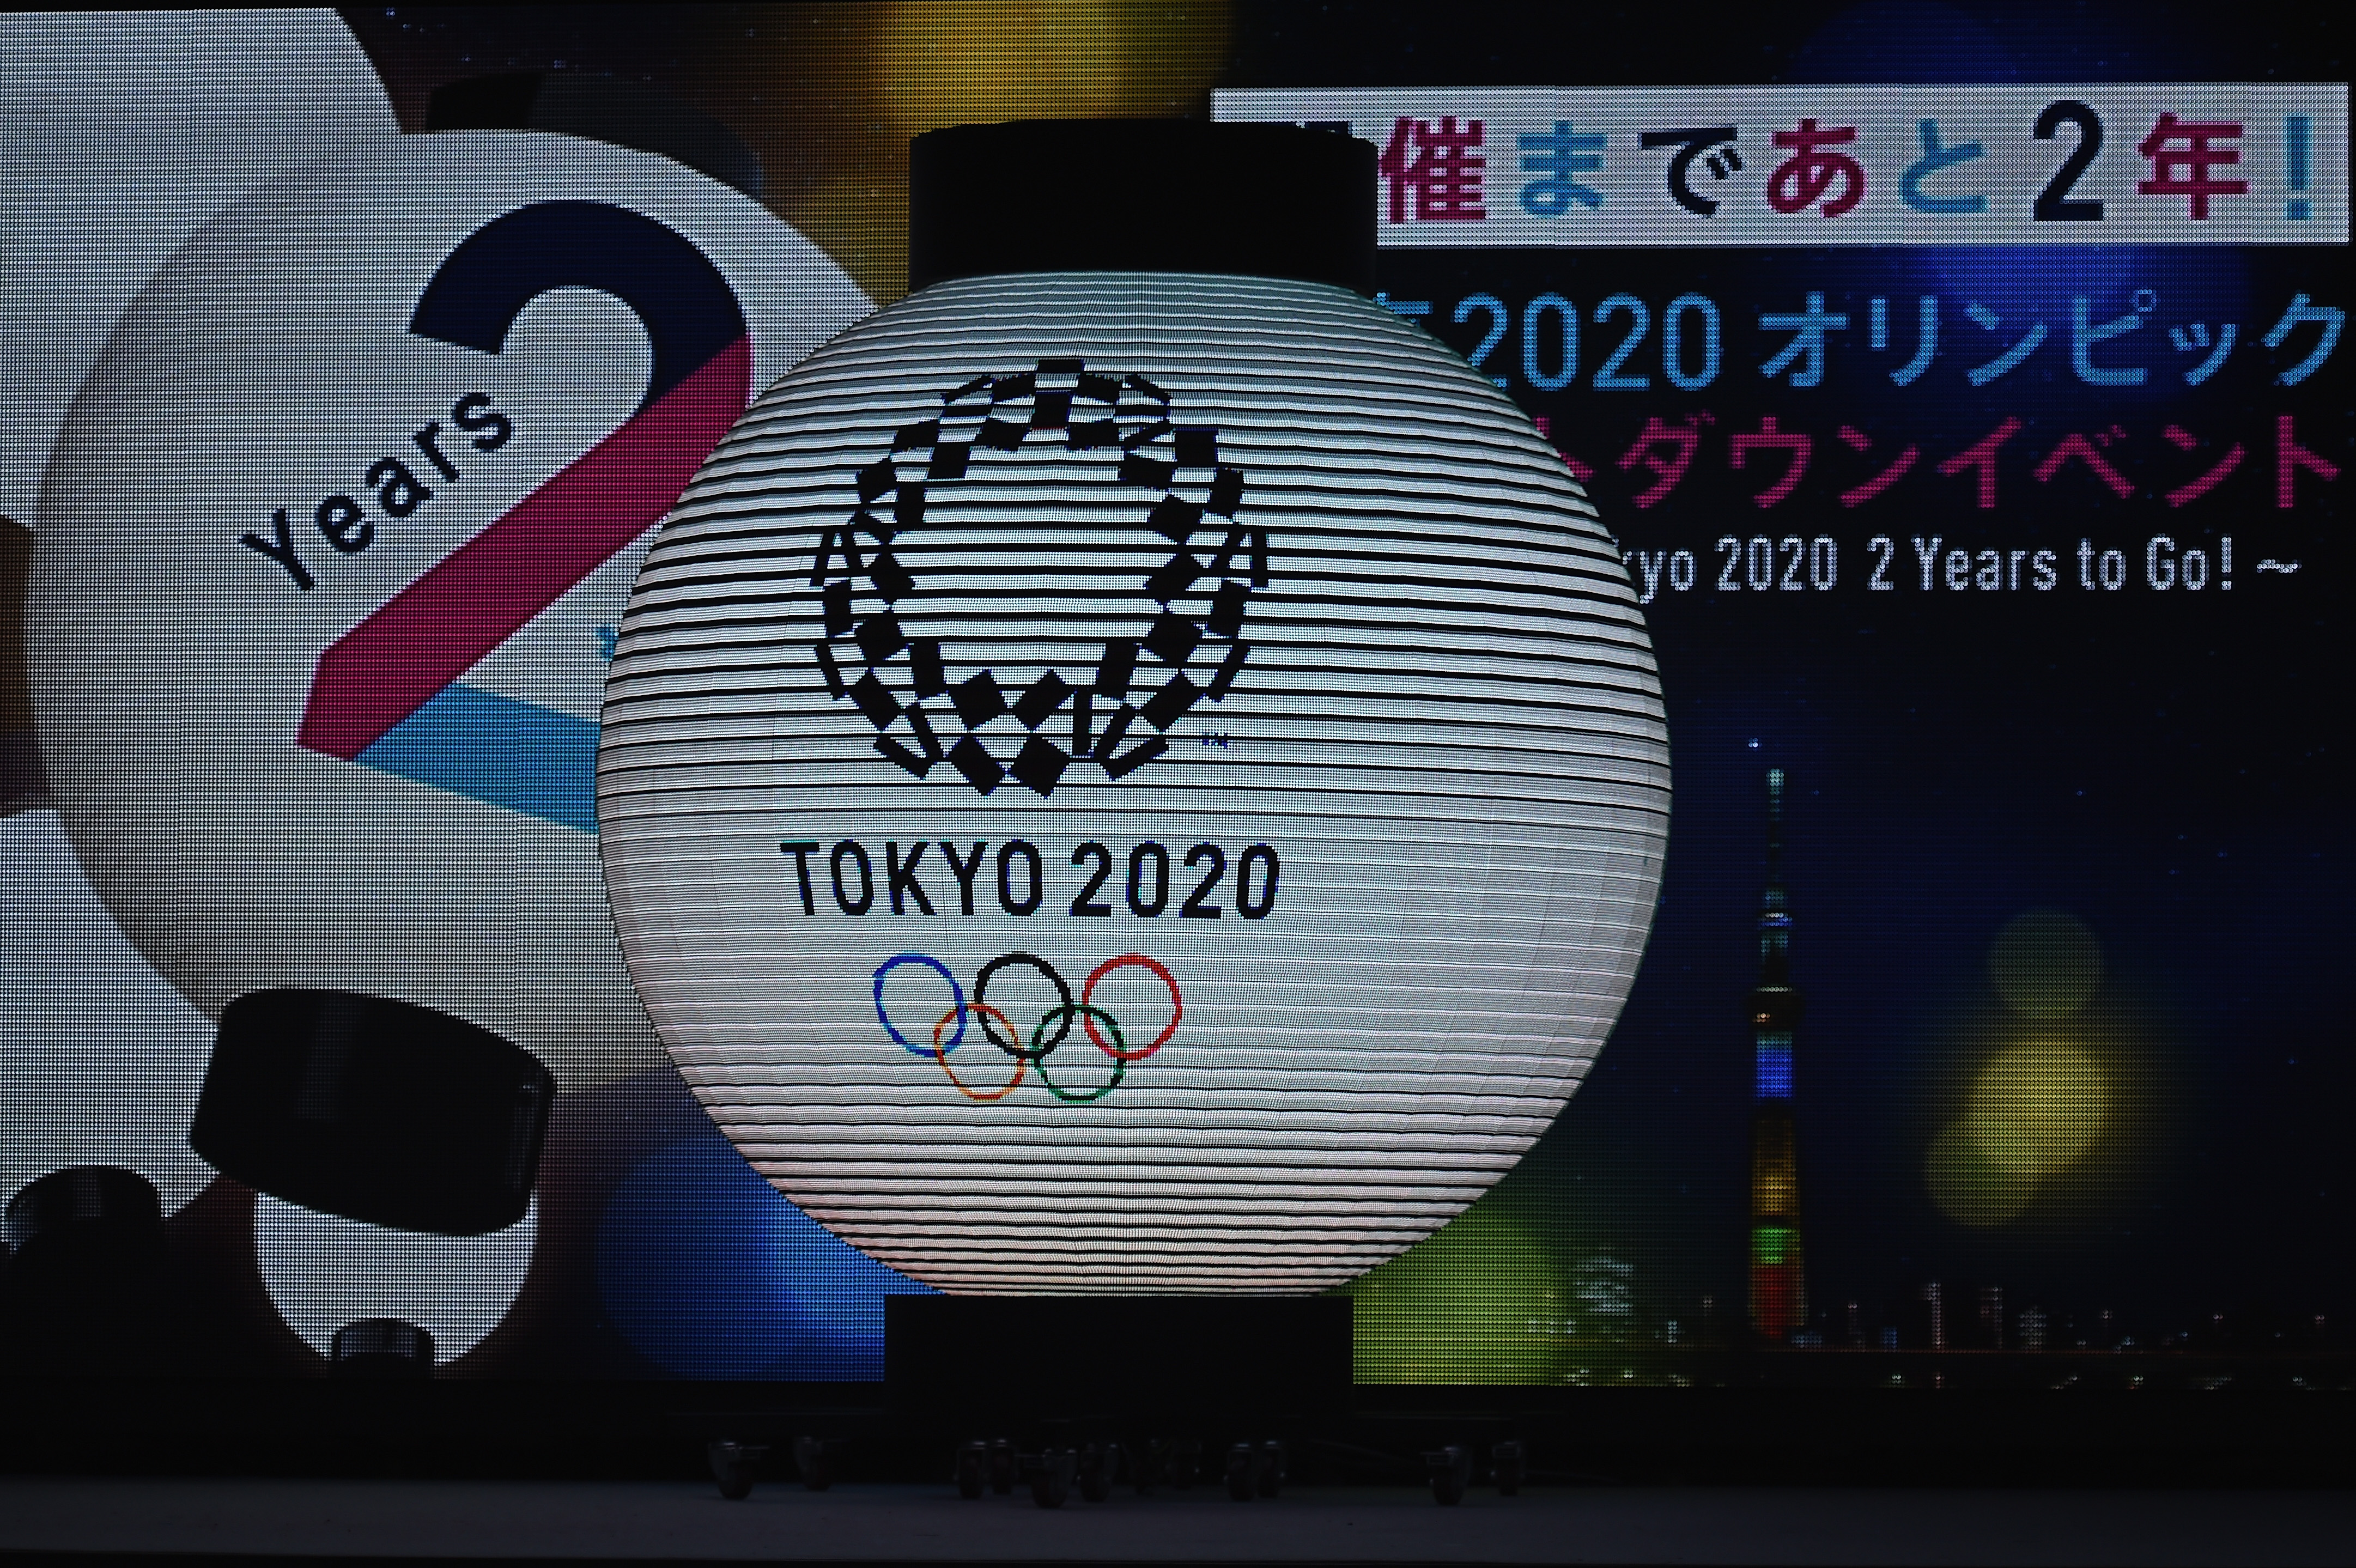 Tokyo Olympics to be pushed to 2021, reveals Shinzo Abe